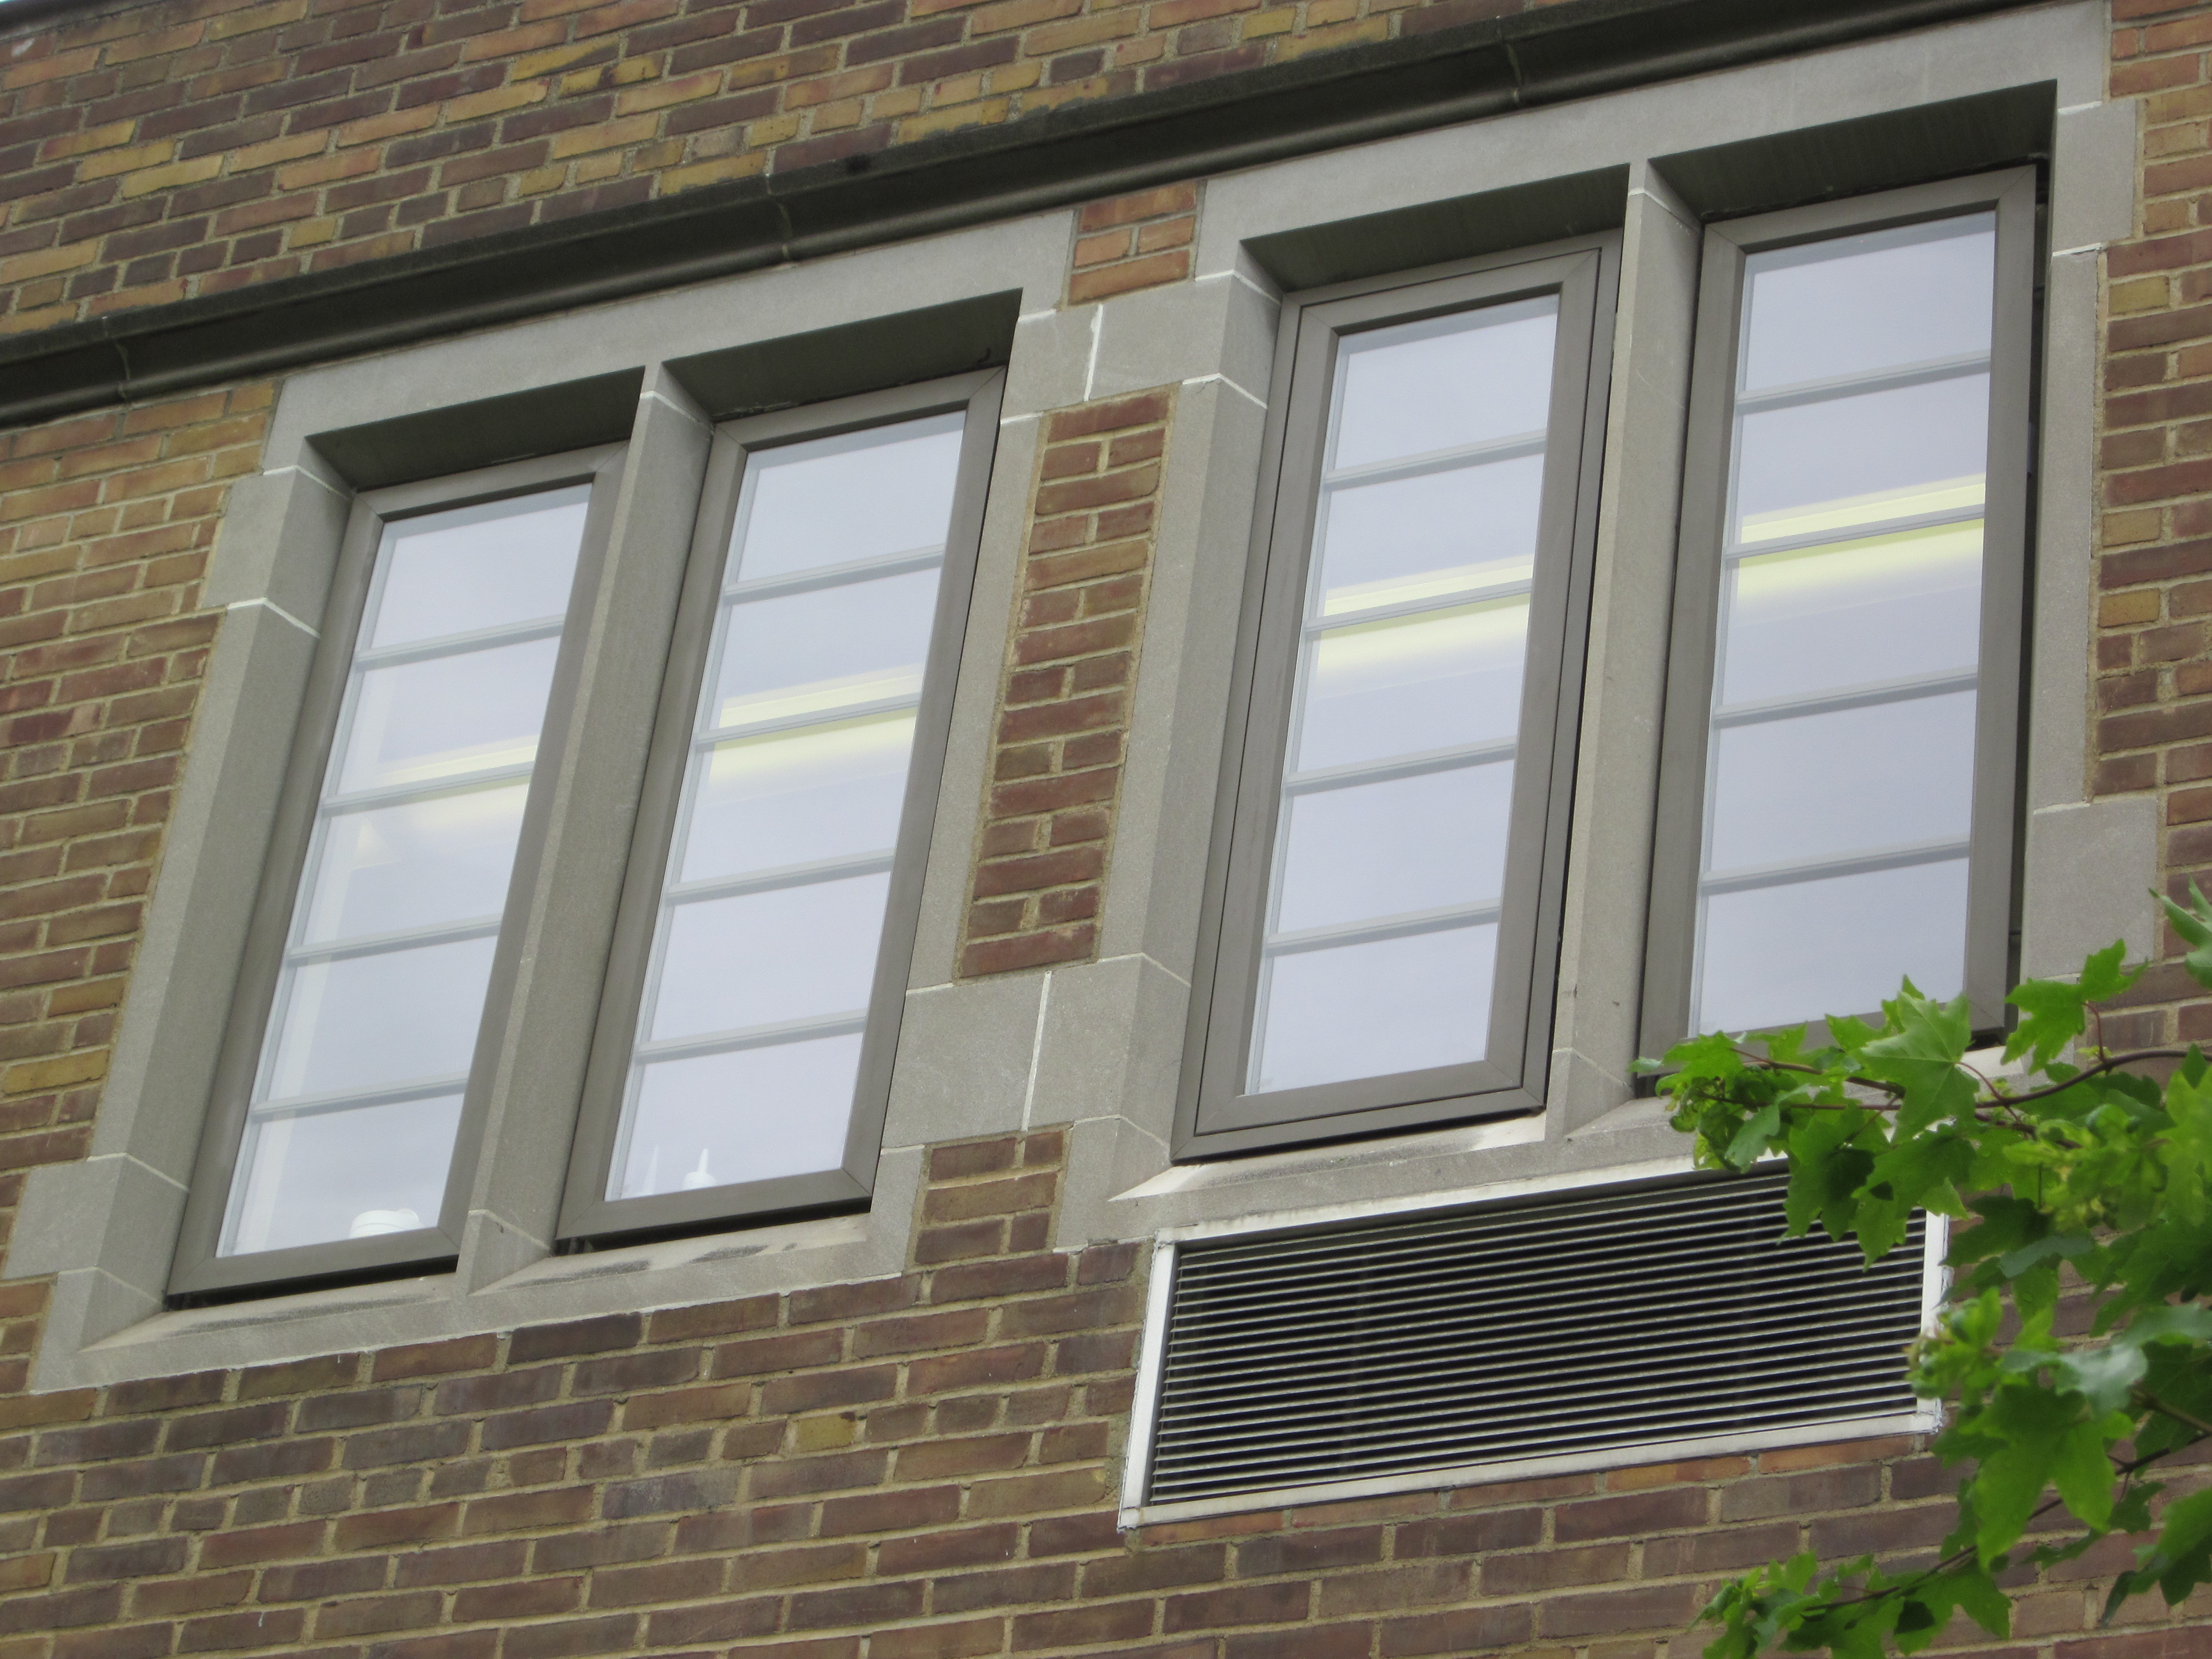 The newly installed windows offered an unexpected benefit for those who work in 